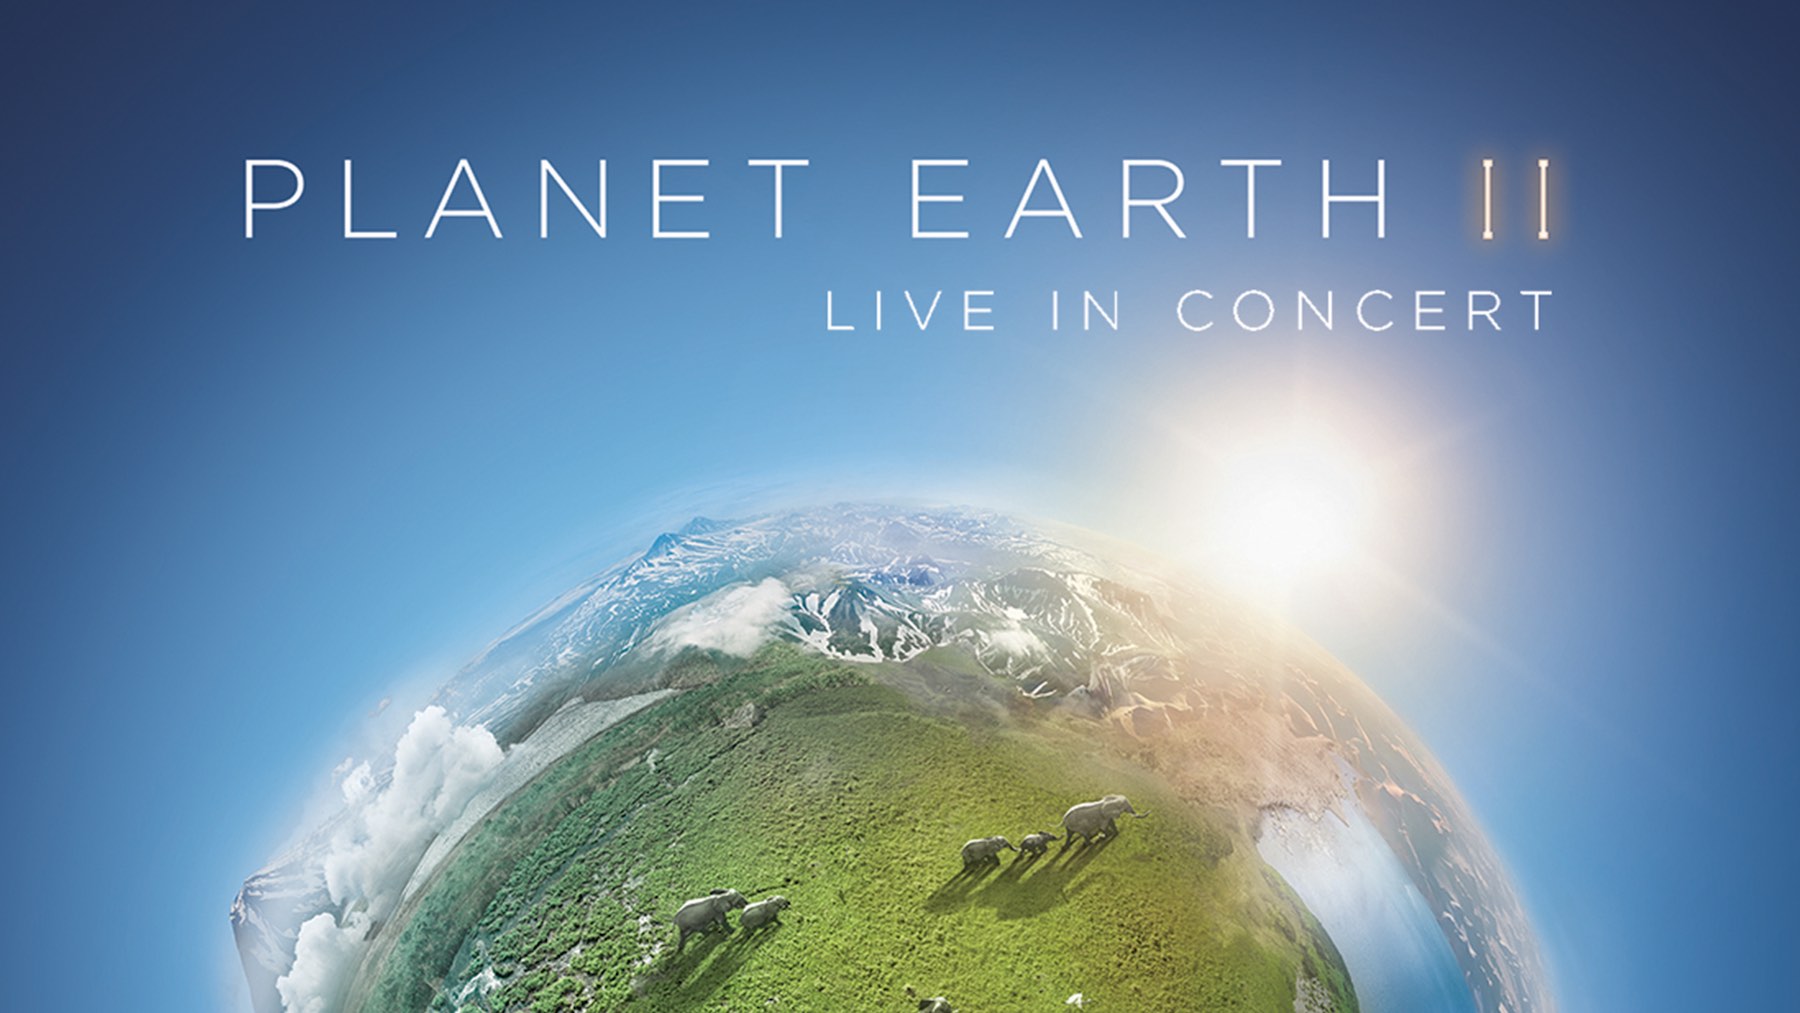 Earth II Live in Concert to premiere at the Royal Albert Hall in